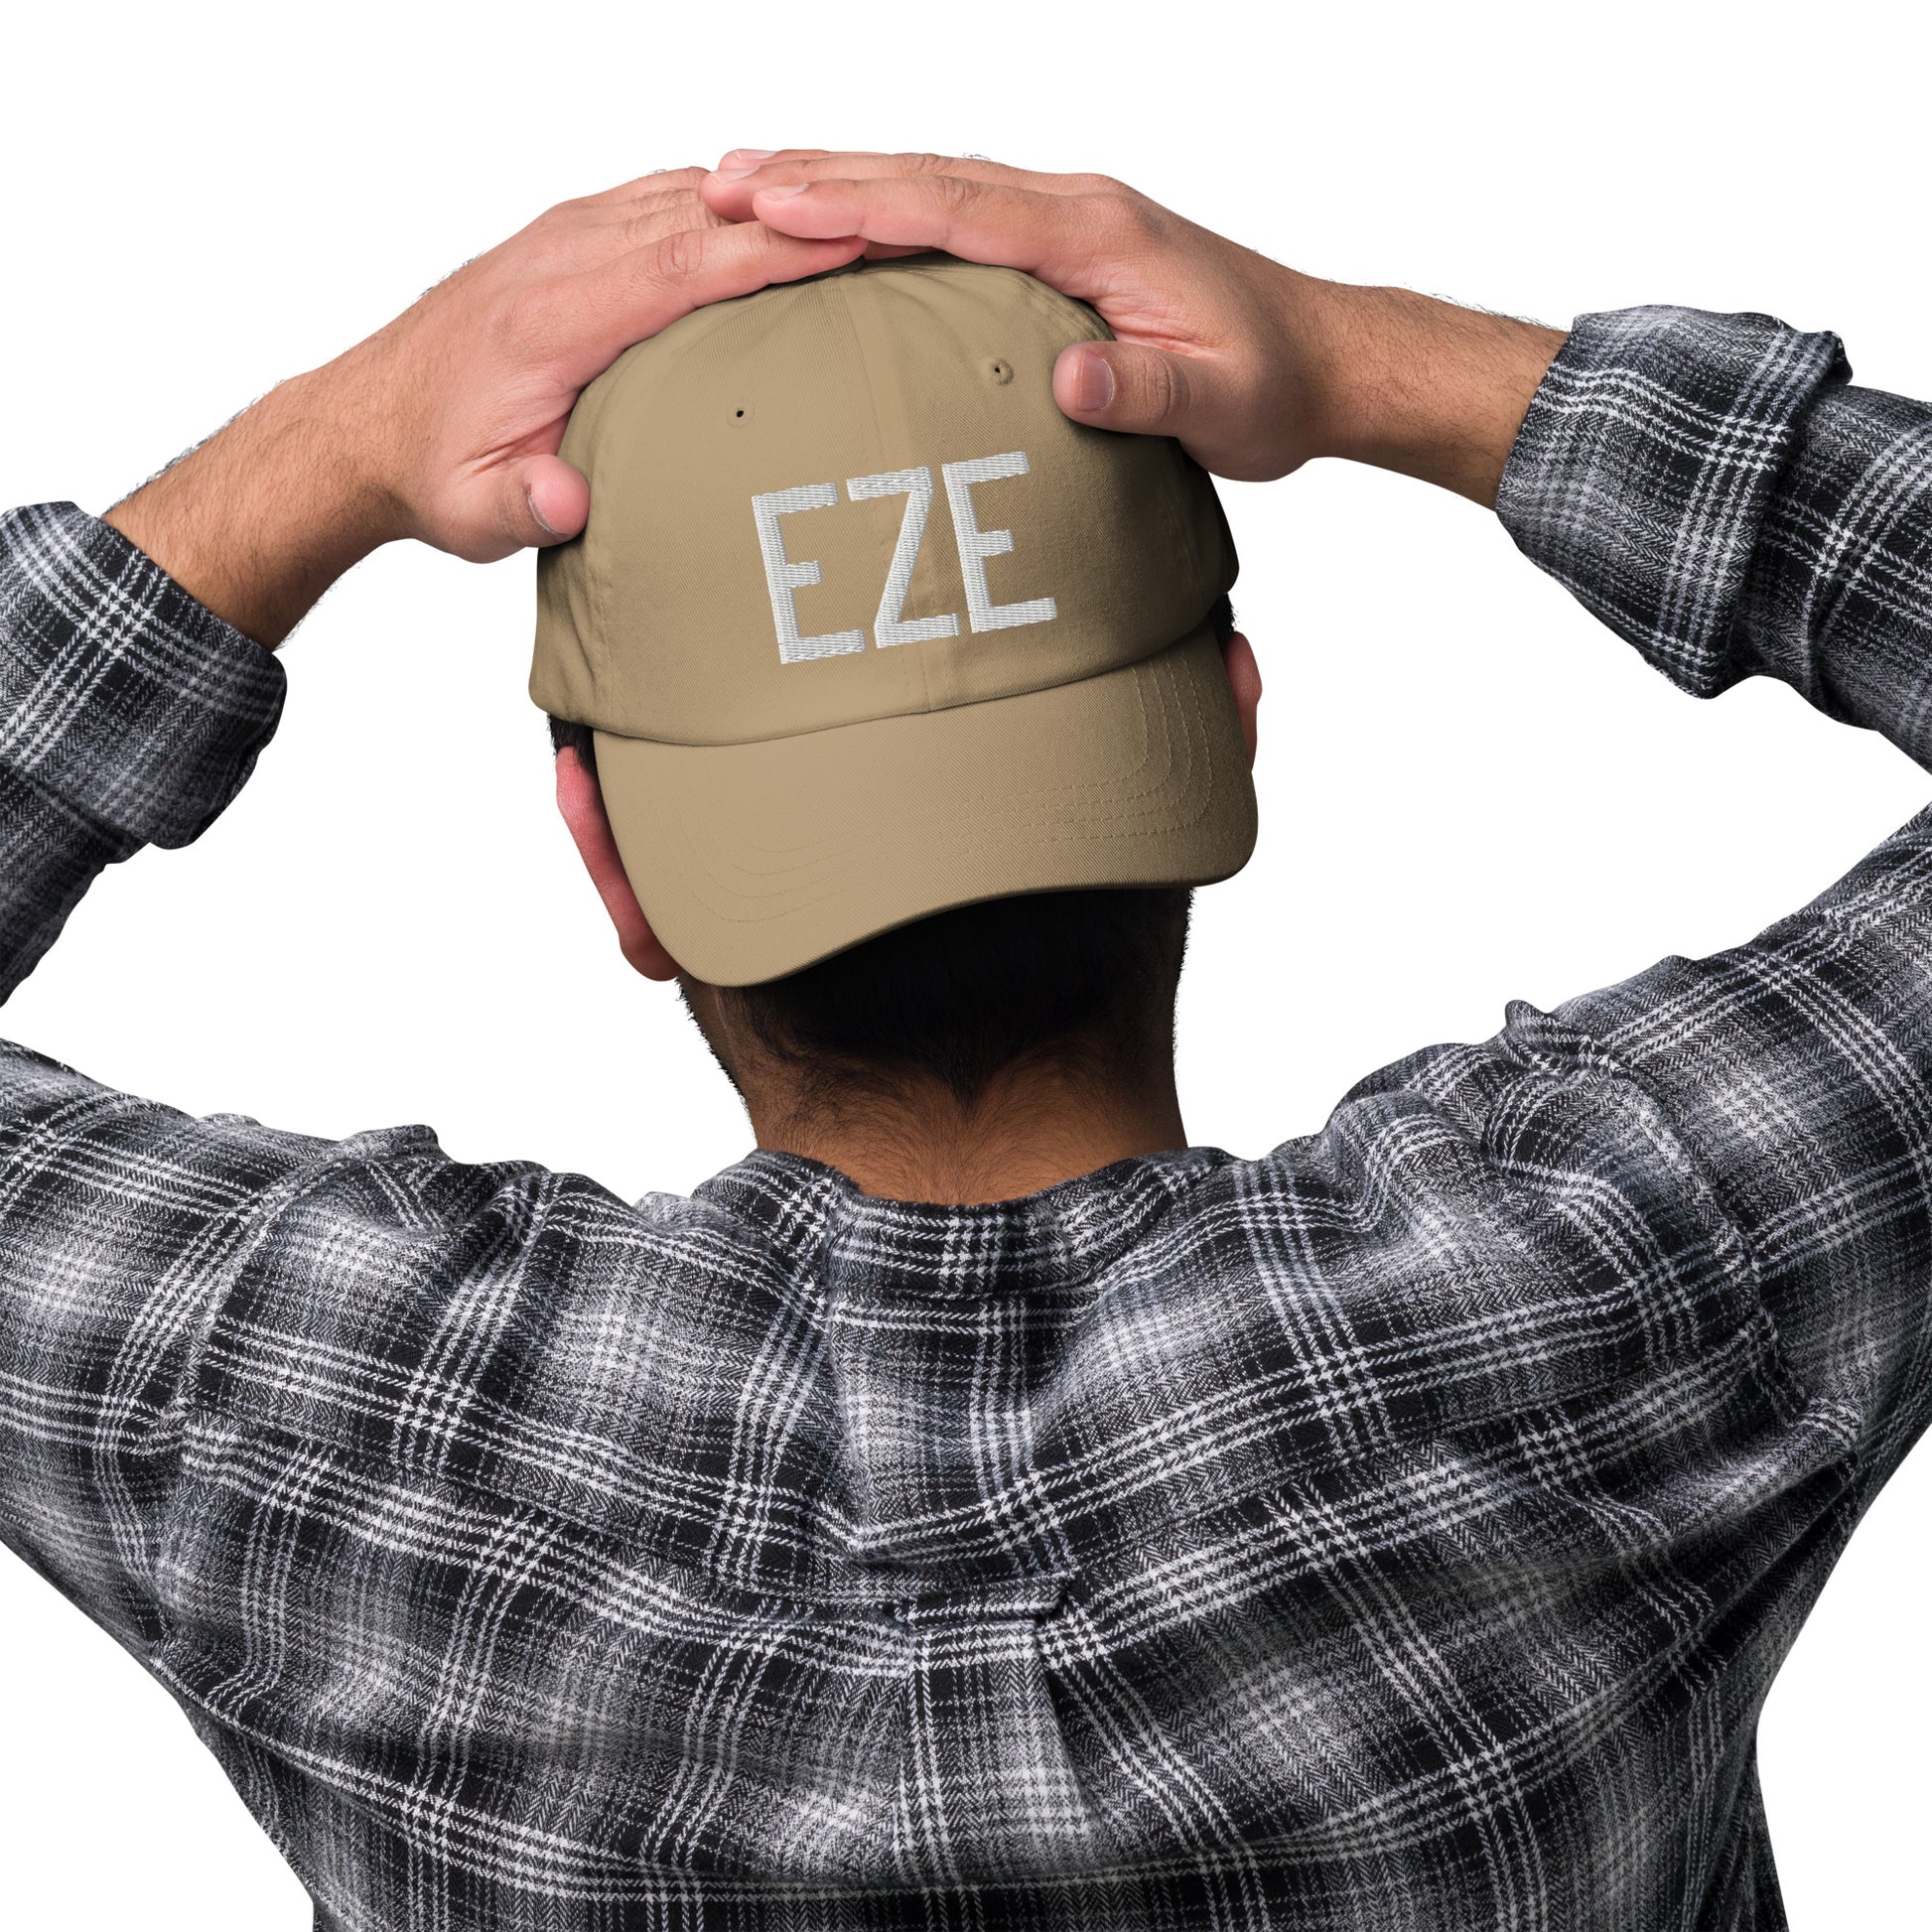 Airport Code Baseball Cap - White • EZE Buenos Aires • YHM Designs - Image 08